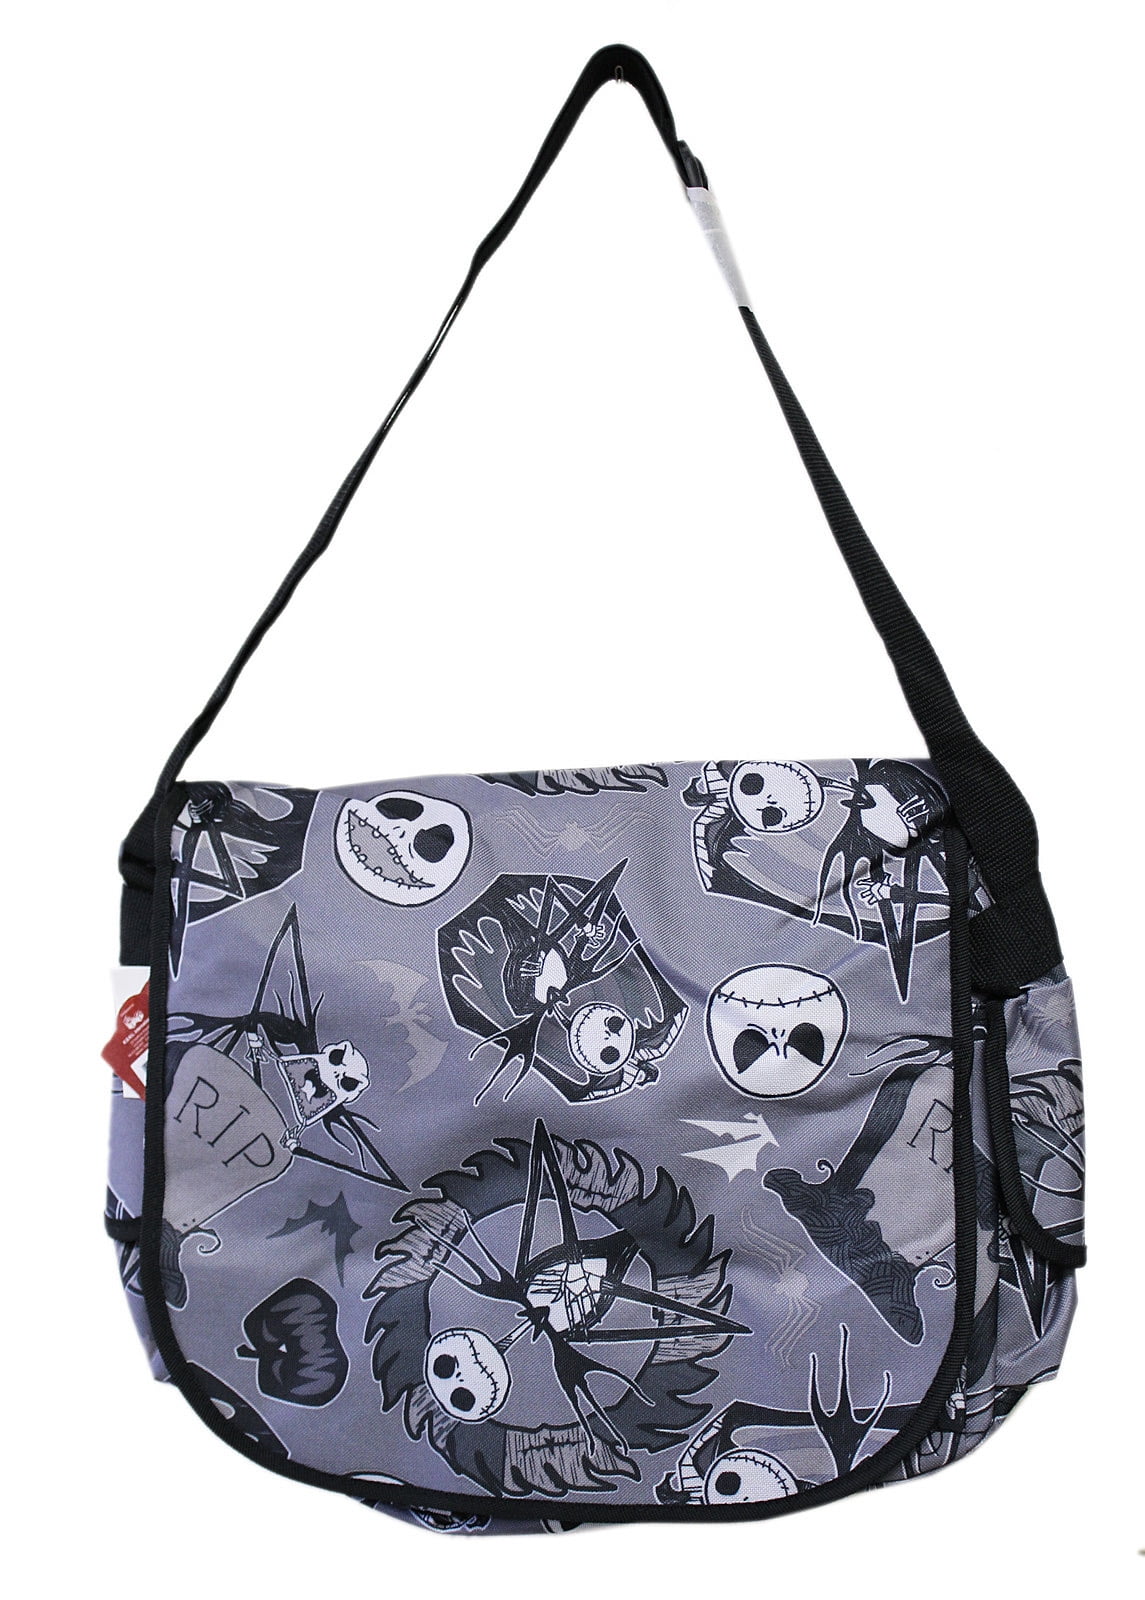 Details about   The Nightmare Before Christmas Jack Skellington Reusable Eco Black Tote w/Handle 